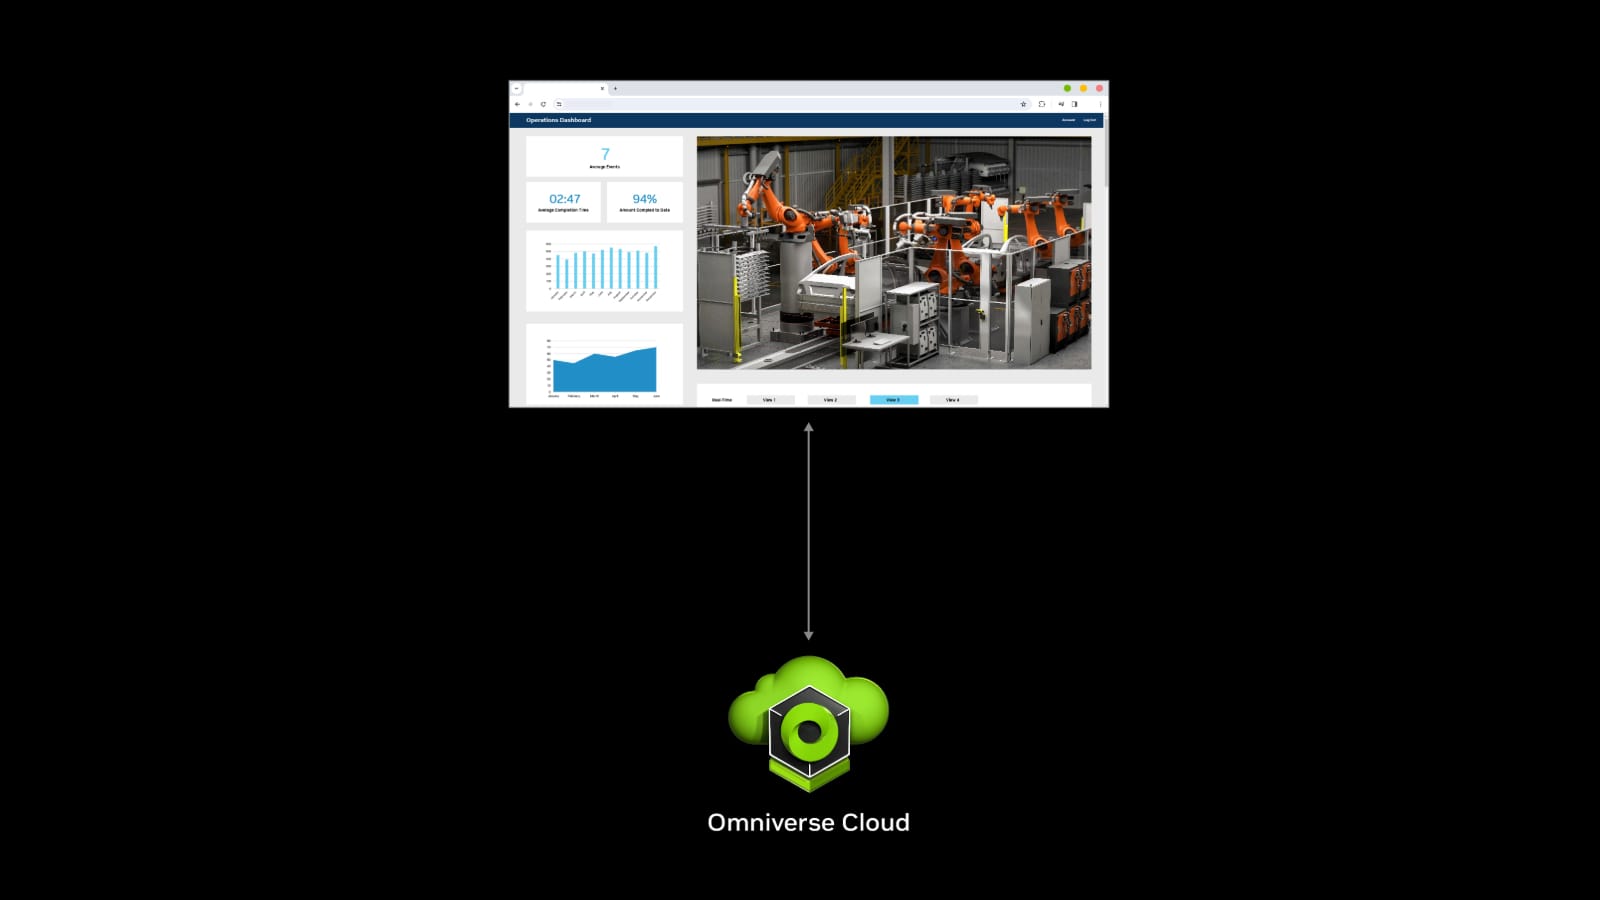 The NVIDIA Omniverse Cloud APIs extend Omniverse's capabilities for digital twins application and workflow creation